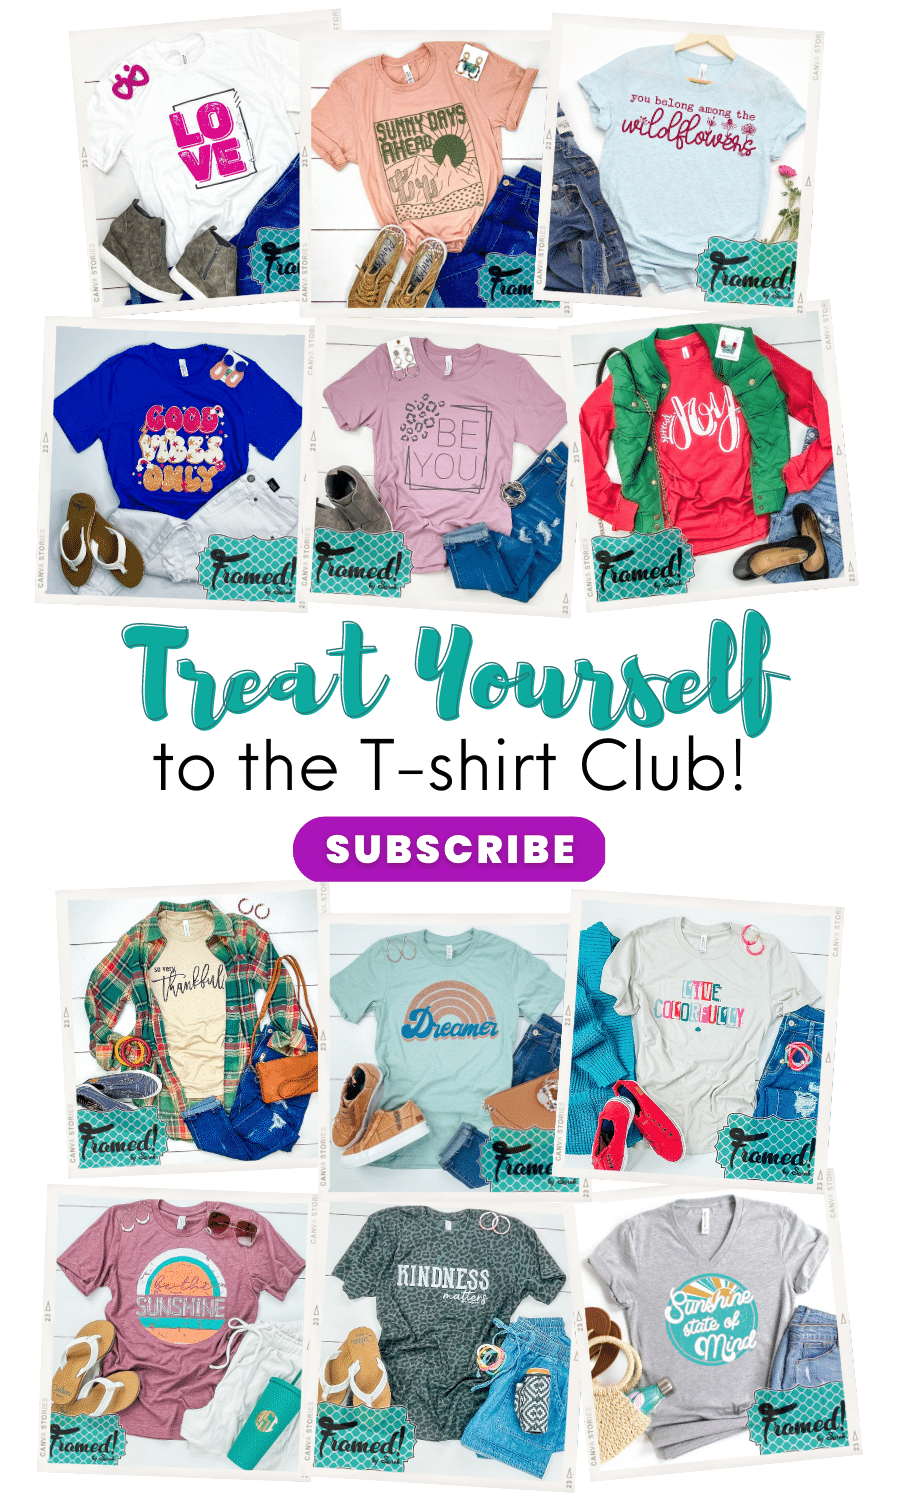 12 pictures of custom graphic tees for women. "Treat Yourself to The T-Shirt Club! Subscribe"